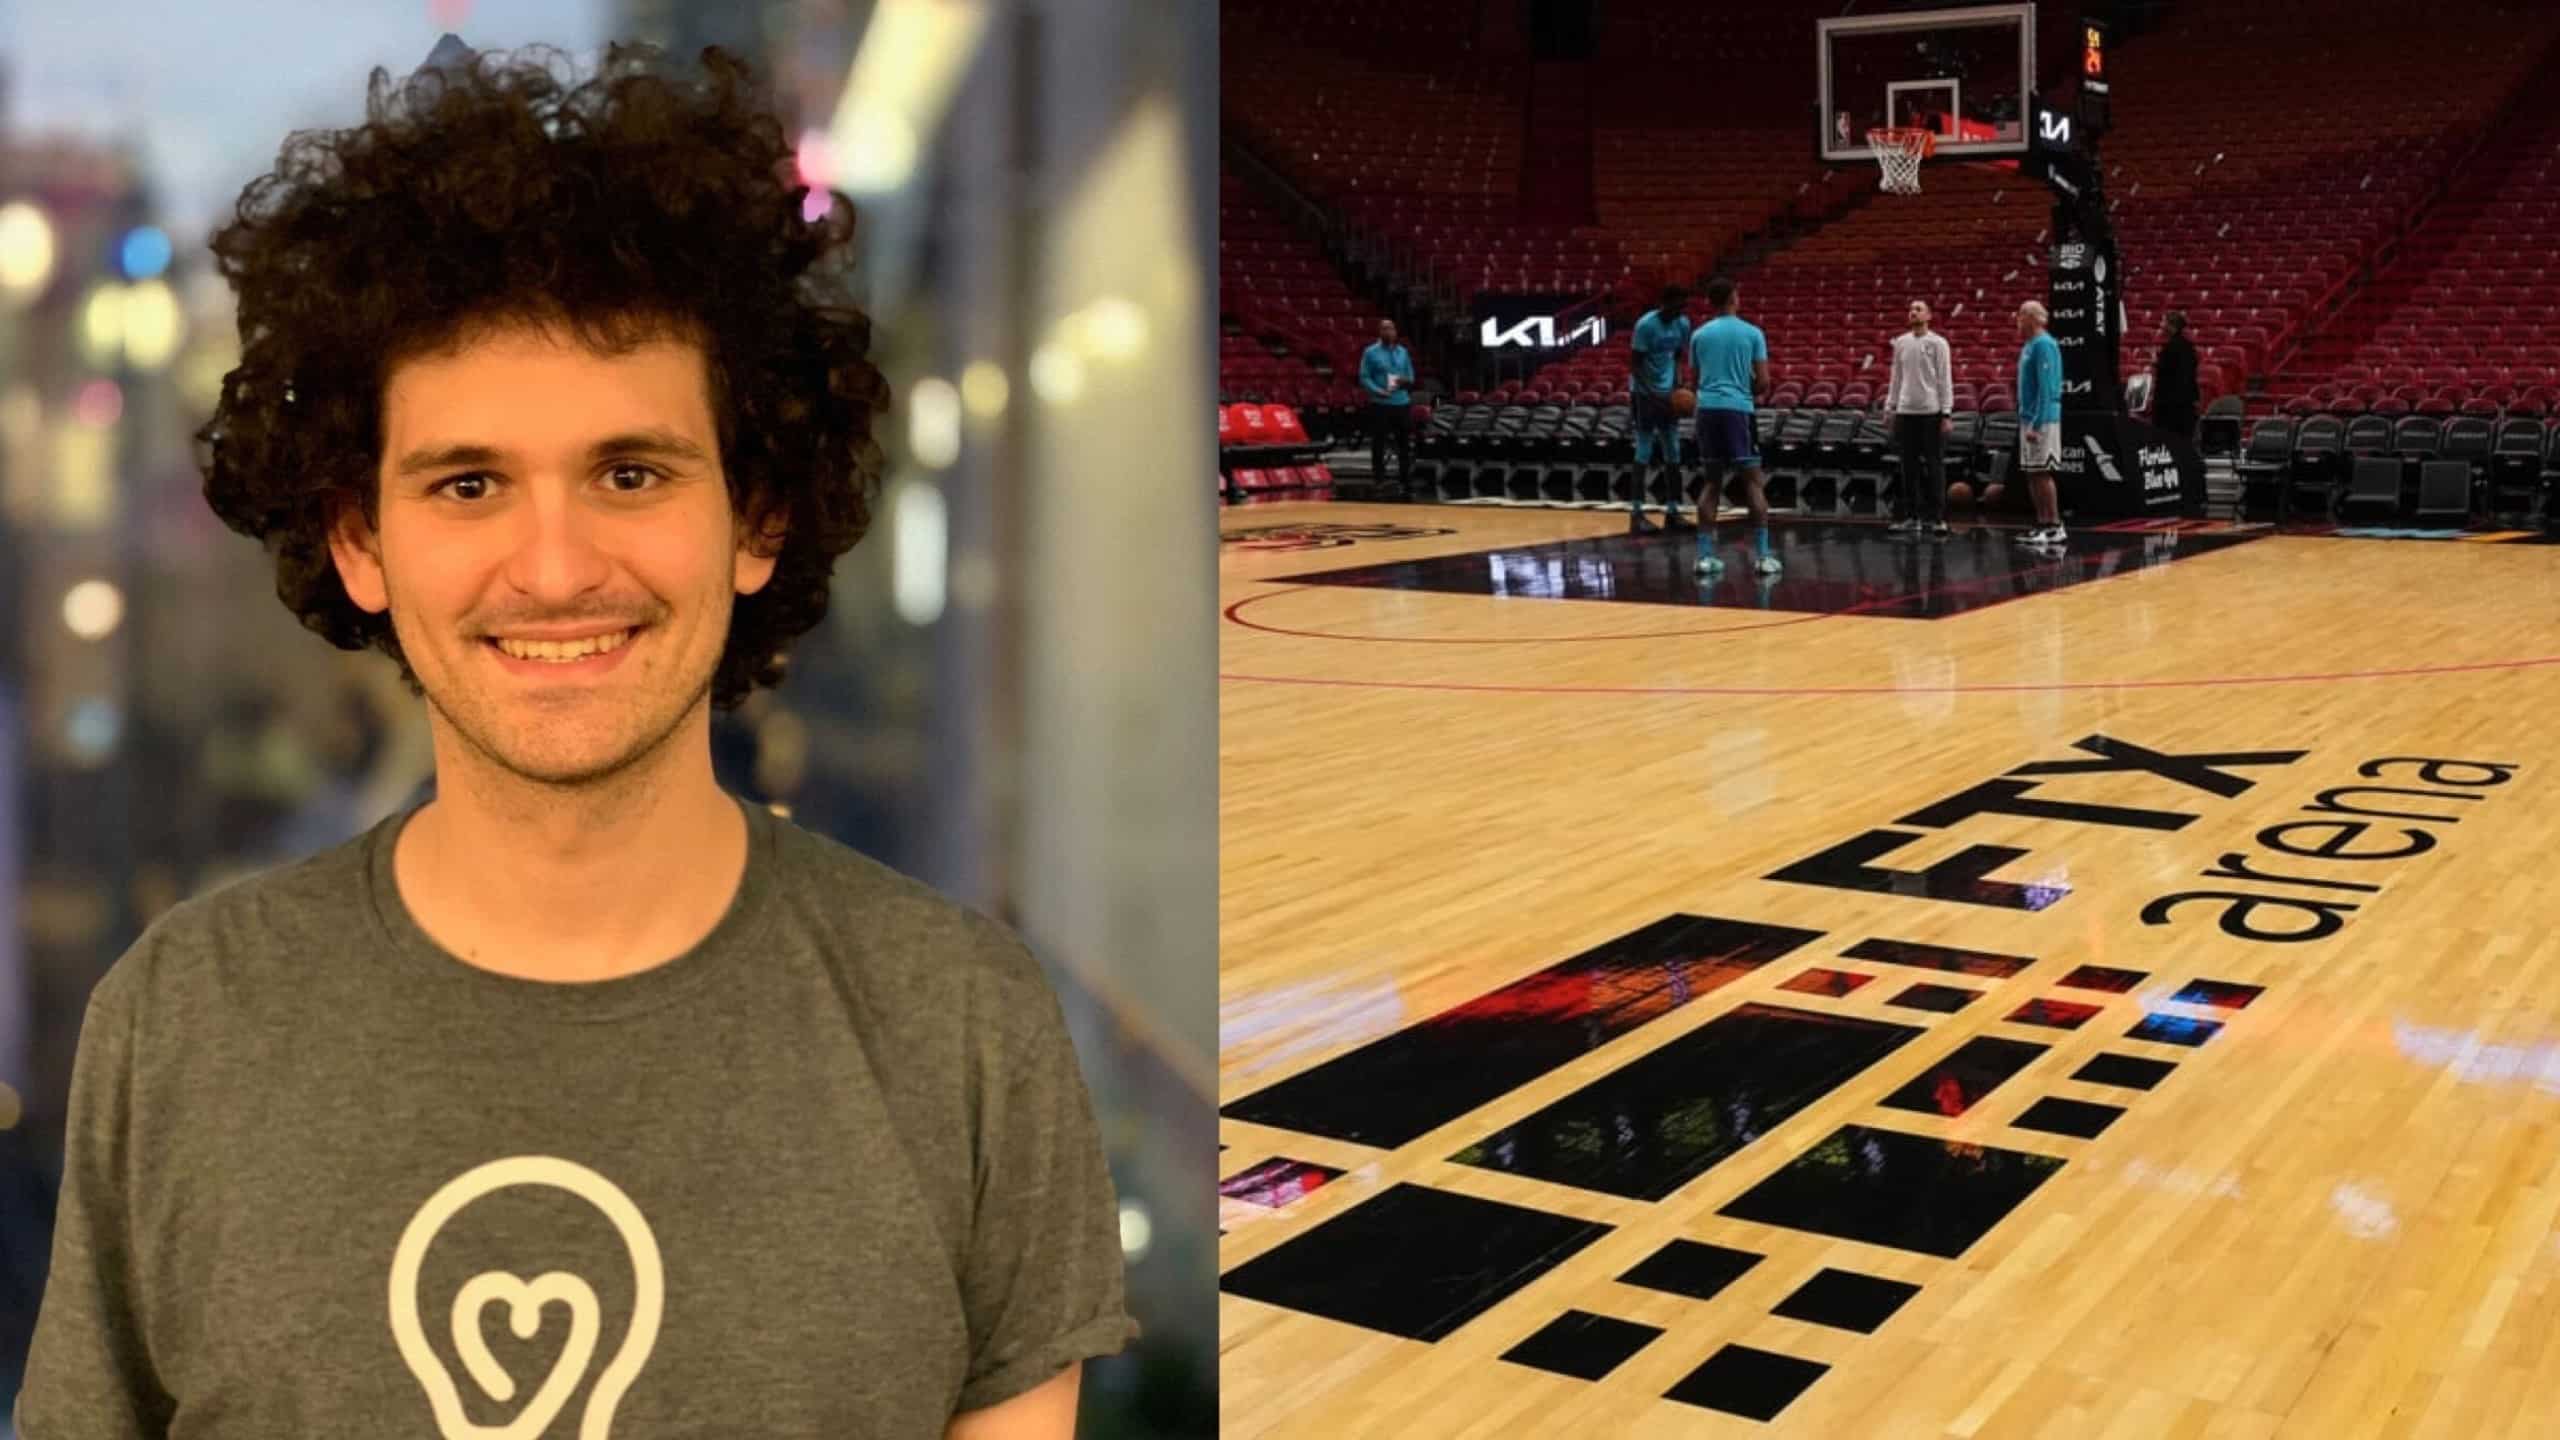 FTX founder Sam Bankman-Fried and FTX logo on NBA court